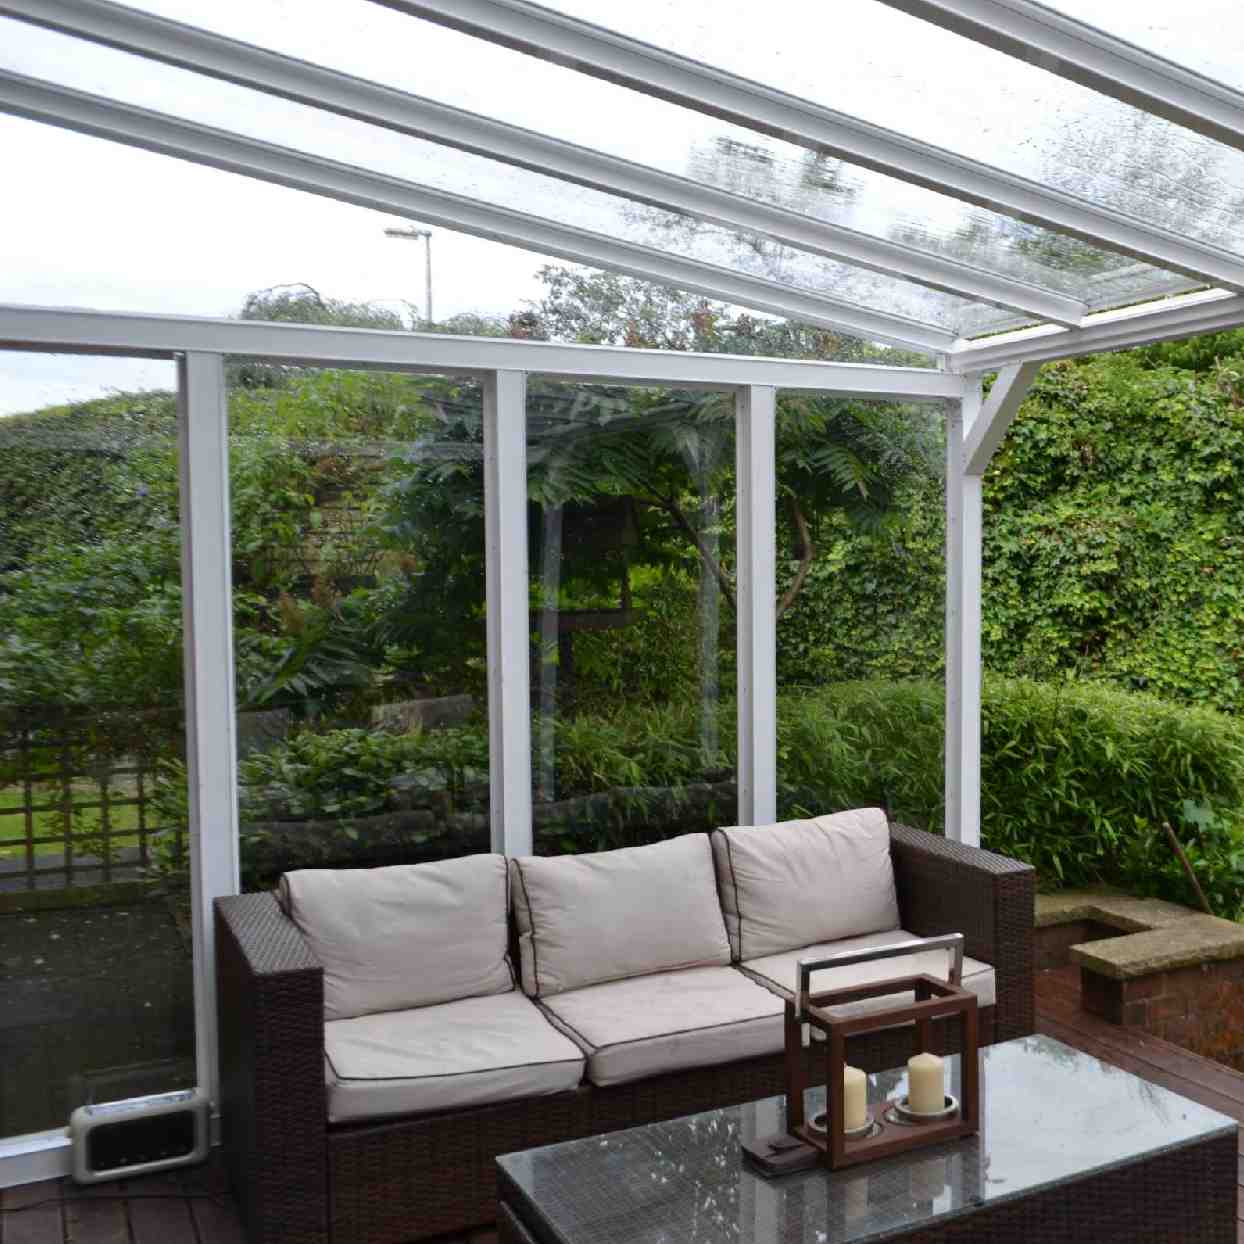 Buy Omega Verandah White with 6mm Glass Clear Plate Polycarbonate Glazing - 9.0m (W) x 4.0m (P), (4) Supporting Posts online today